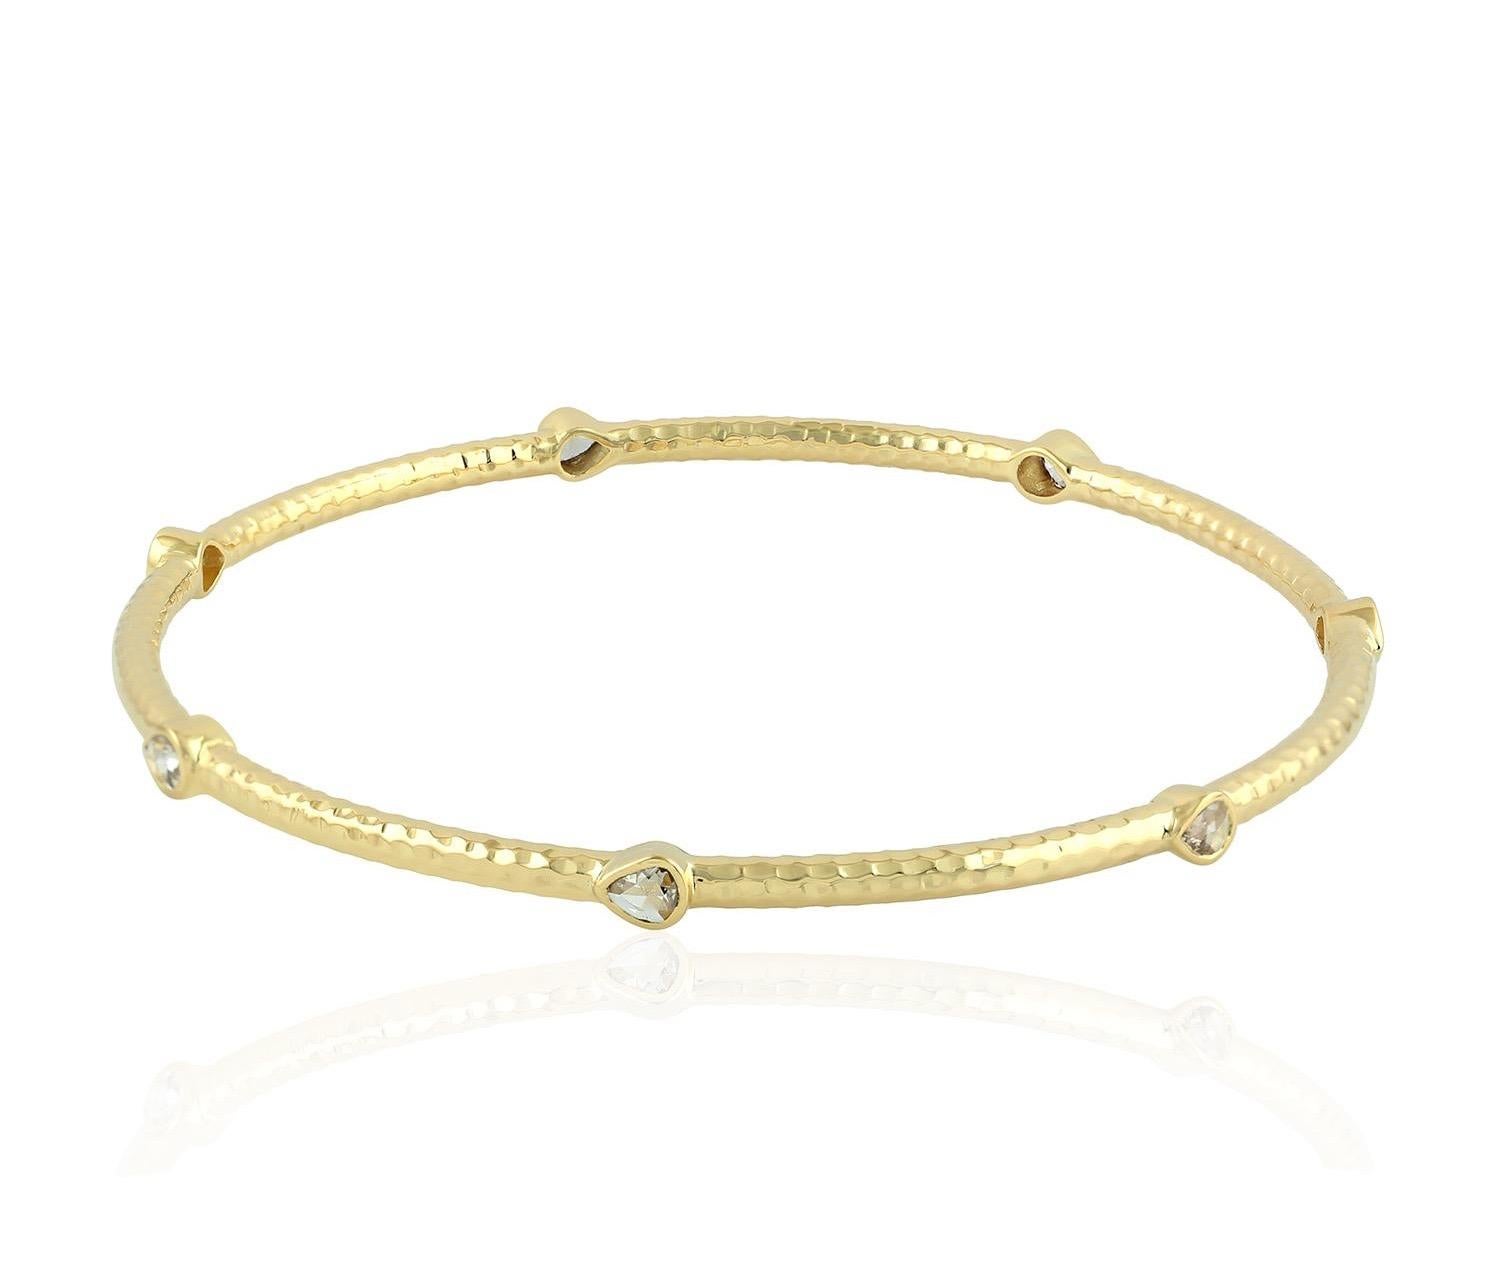 A beautiful bracelet handmade in 18K gold with hammered finish. It is set in .53 carats rosecut diamonds. 

FOLLOW  MEGHNA JEWELS storefront to view the latest collection & exclusive pieces.  Meghna Jewels is proudly rated as a Top Seller on 1stdibs